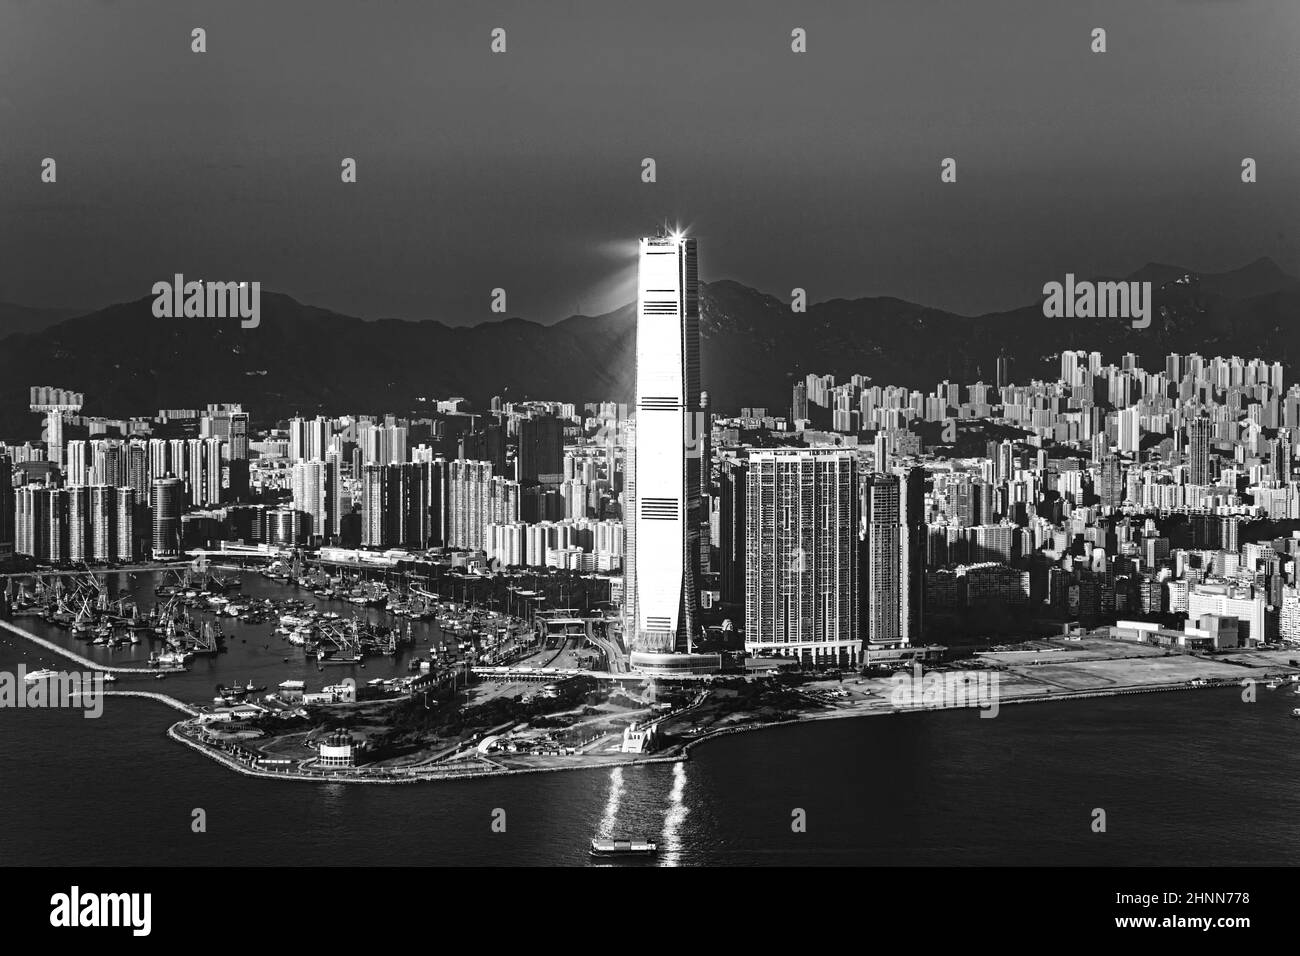 Commerce in hong kong china Black and White Stock Photos & Images - Alamy